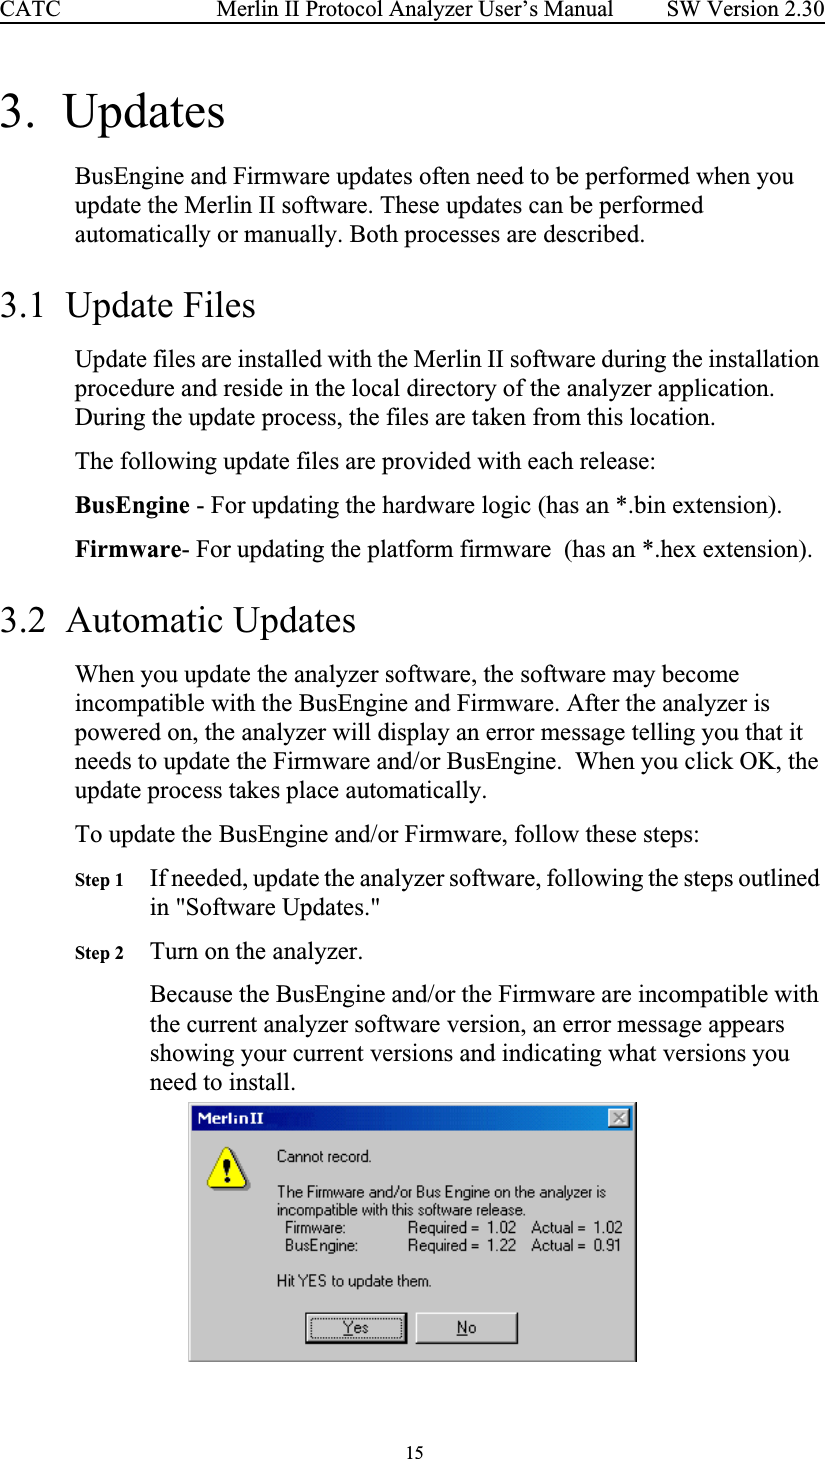  15 Merlin II Protocol Analyzer User’s ManualCATC SW Version 2.303.  UpdatesBusEngine and Firmware updates often need to be performed when you update the Merlin II software. These updates can be performed automatically or manually. Both processes are described.3.1  Update FilesUpdate files are installed with the Merlin II software during the installation procedure and reside in the local directory of the analyzer application.  During the update process, the files are taken from this location.The following update files are provided with each release:BusEngine - For updating the hardware logic (has an *.bin extension).Firmware- For updating the platform firmware  (has an *.hex extension).3.2  Automatic UpdatesWhen you update the analyzer software, the software may become incompatible with the BusEngine and Firmware. After the analyzer is powered on, the analyzer will display an error message telling you that it needs to update the Firmware and/or BusEngine.  When you click OK, the update process takes place automatically. To update the BusEngine and/or Firmware, follow these steps: Step 1 If needed, update the analyzer software, following the steps outlined in &quot;Software Updates.&quot;Step 2 Turn on the analyzer.Because the BusEngine and/or the Firmware are incompatible with the current analyzer software version, an error message appears showing your current versions and indicating what versions you need to install.